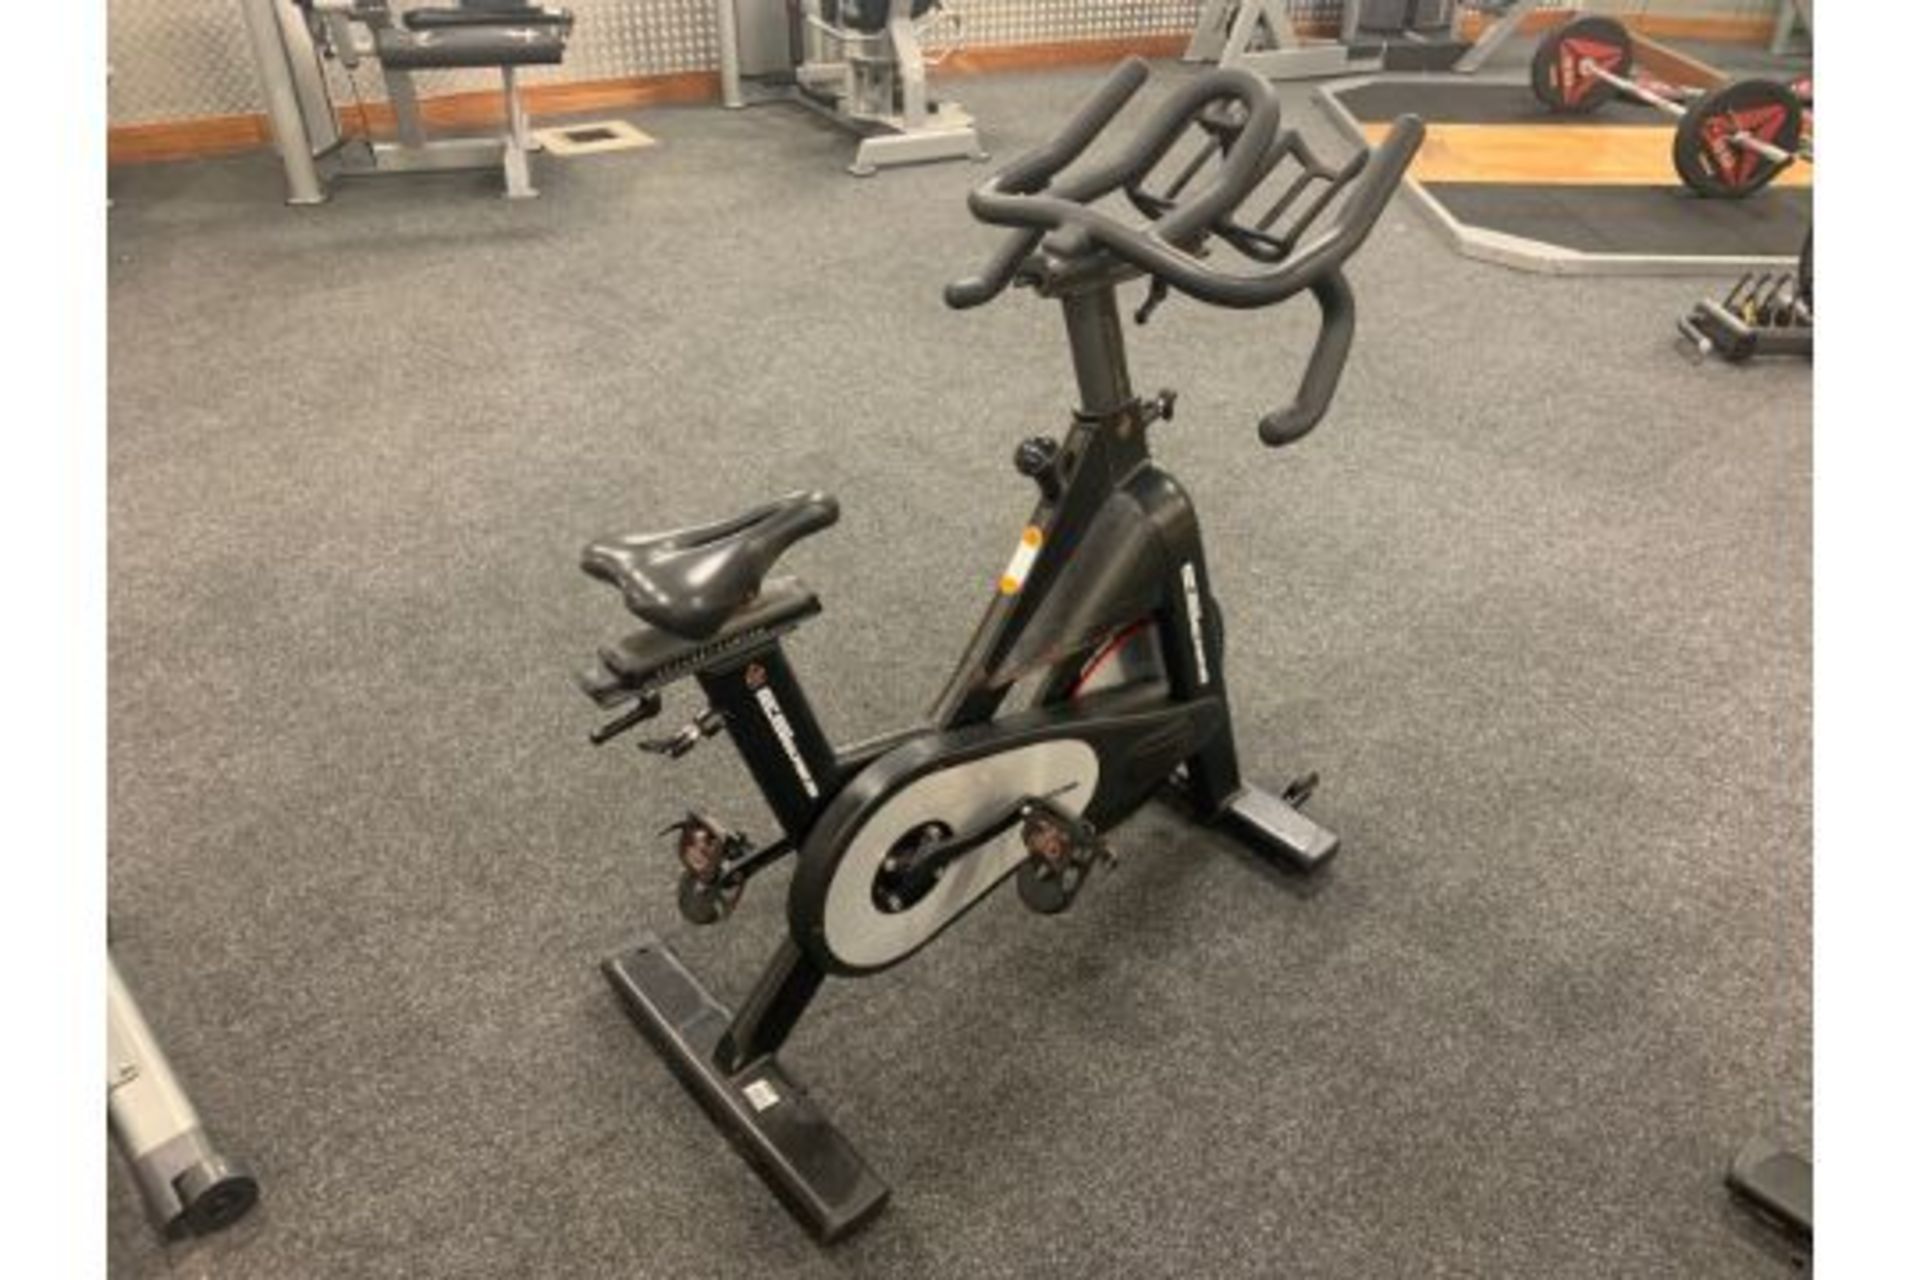 F Series Spin Bike - Image 3 of 5